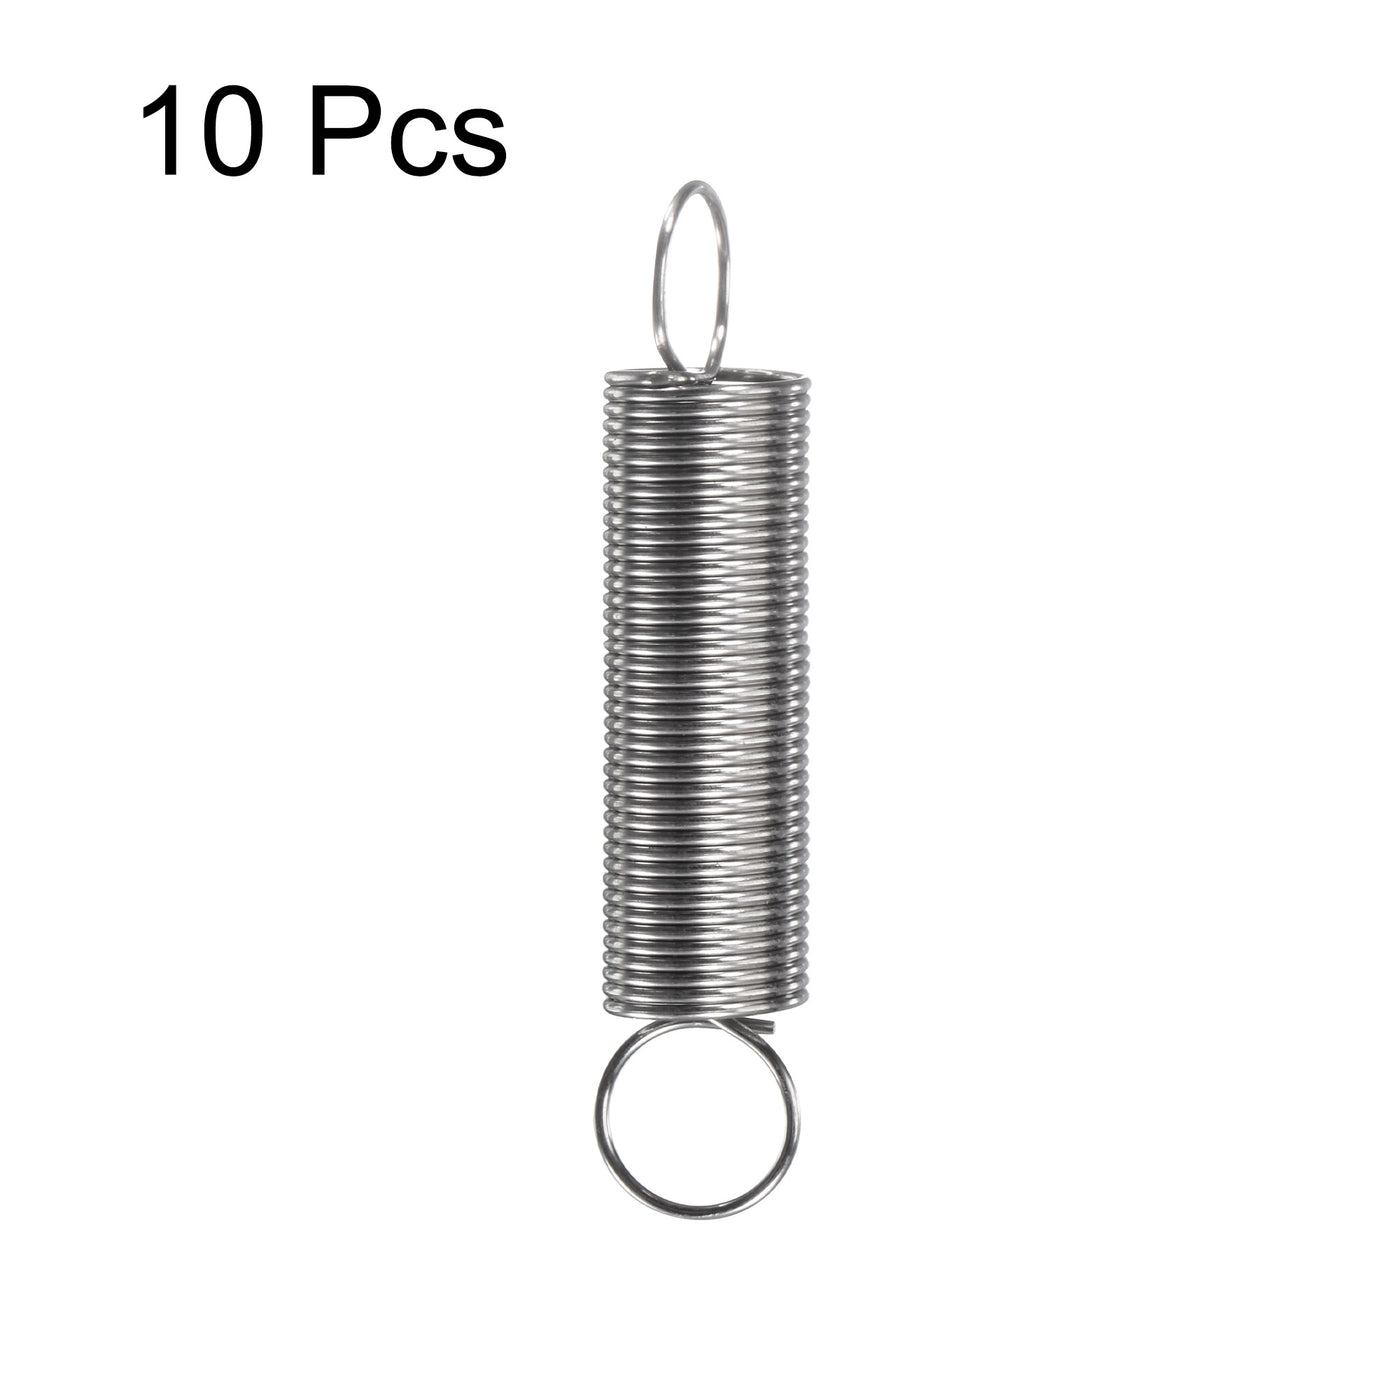 Uxcell Uxcell 0.6mmx8mmx50mm Extended Compression Spring,2.3Lbs Load Capacity,Silver,10pcs